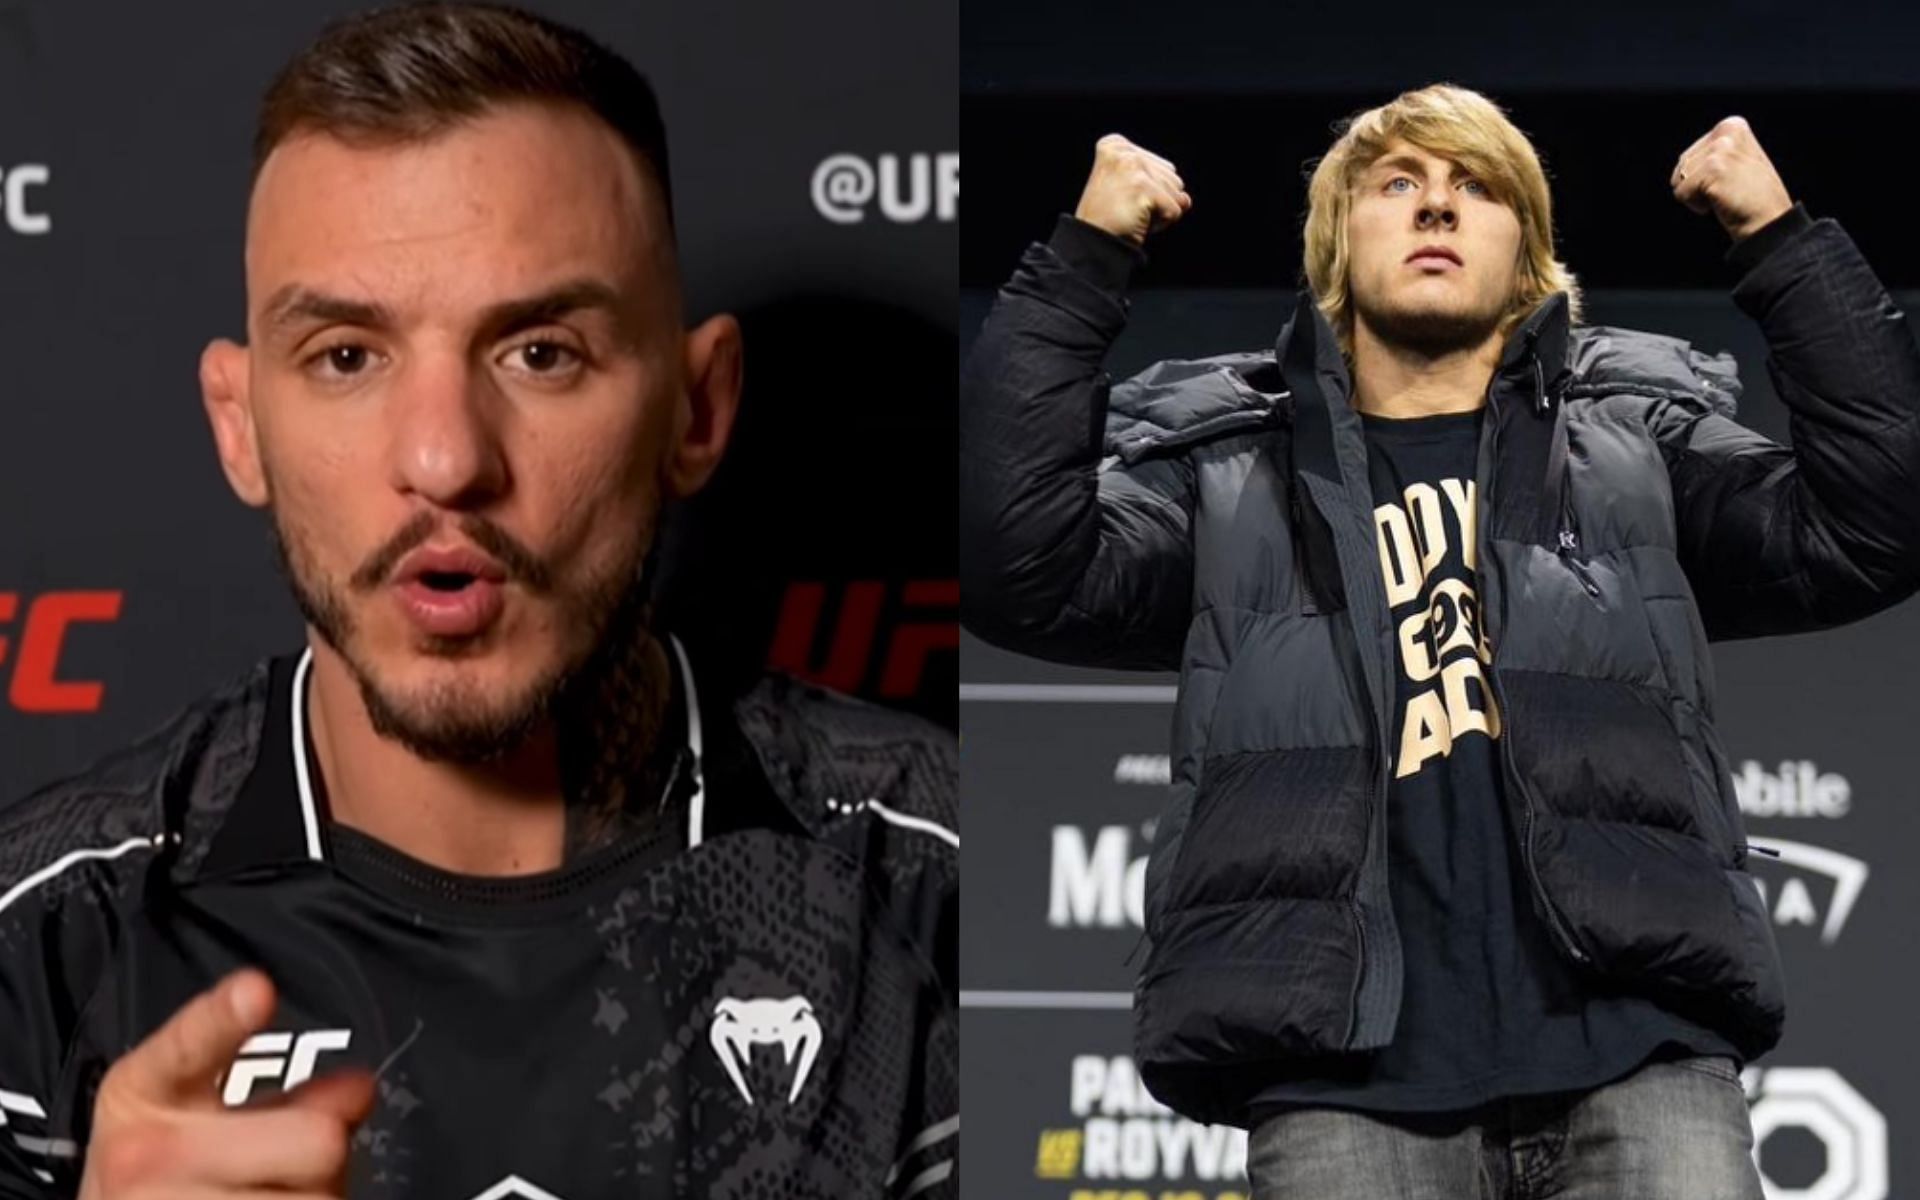 Renato Moicano (left) explains decision to fight at UFC 300 rather than wait for Paddy Pimblett (right) [Images courtesy of @renato_moicano_ufc &amp; @theufcbaddy on Instagram]